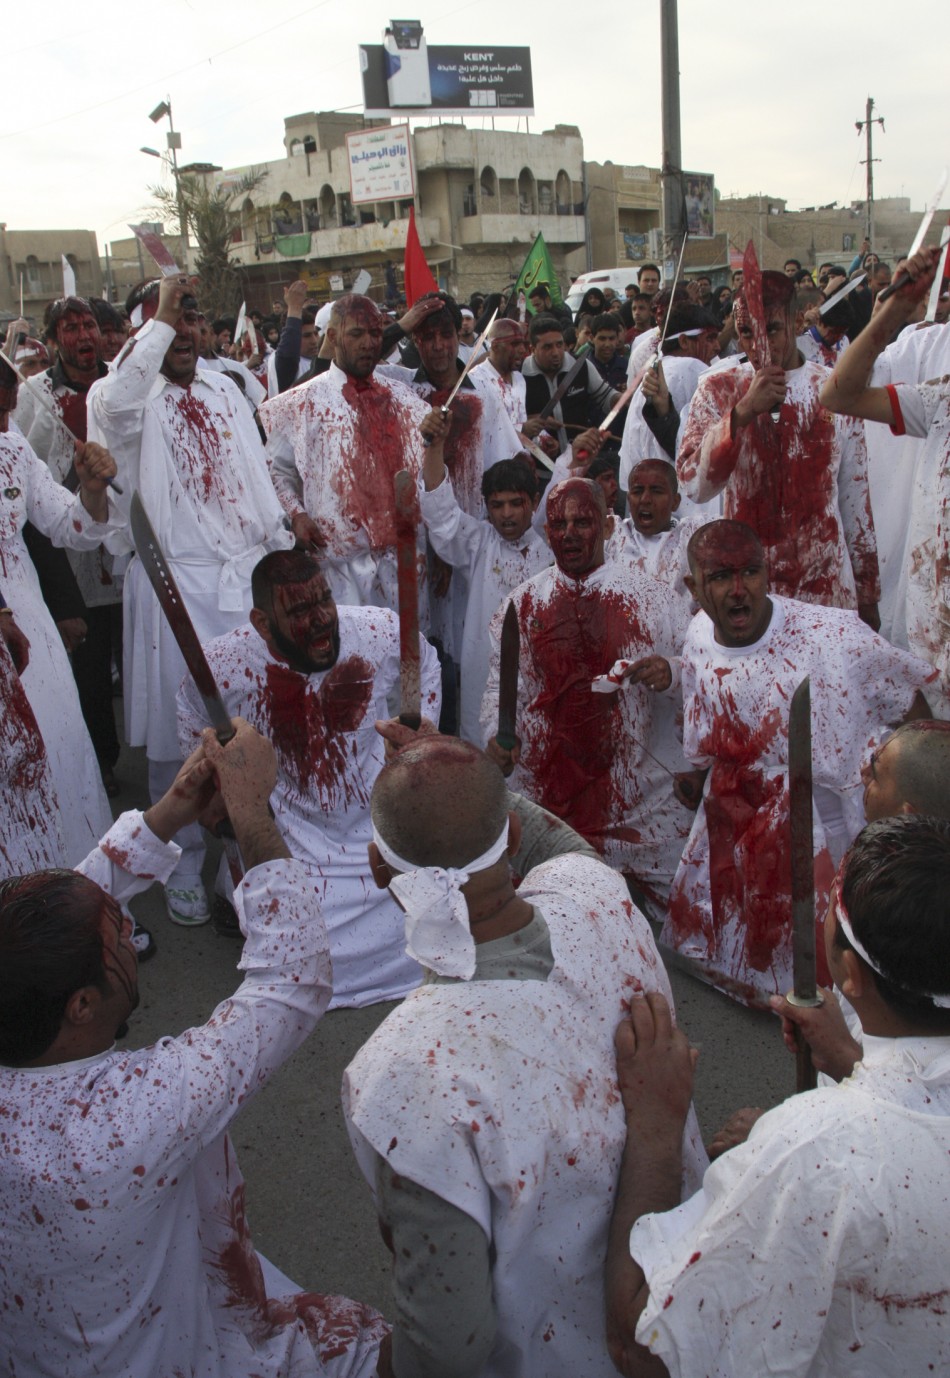 Shiite Iraqi men covered in blood take part in the Ashura procession in Baghdads Sadr City